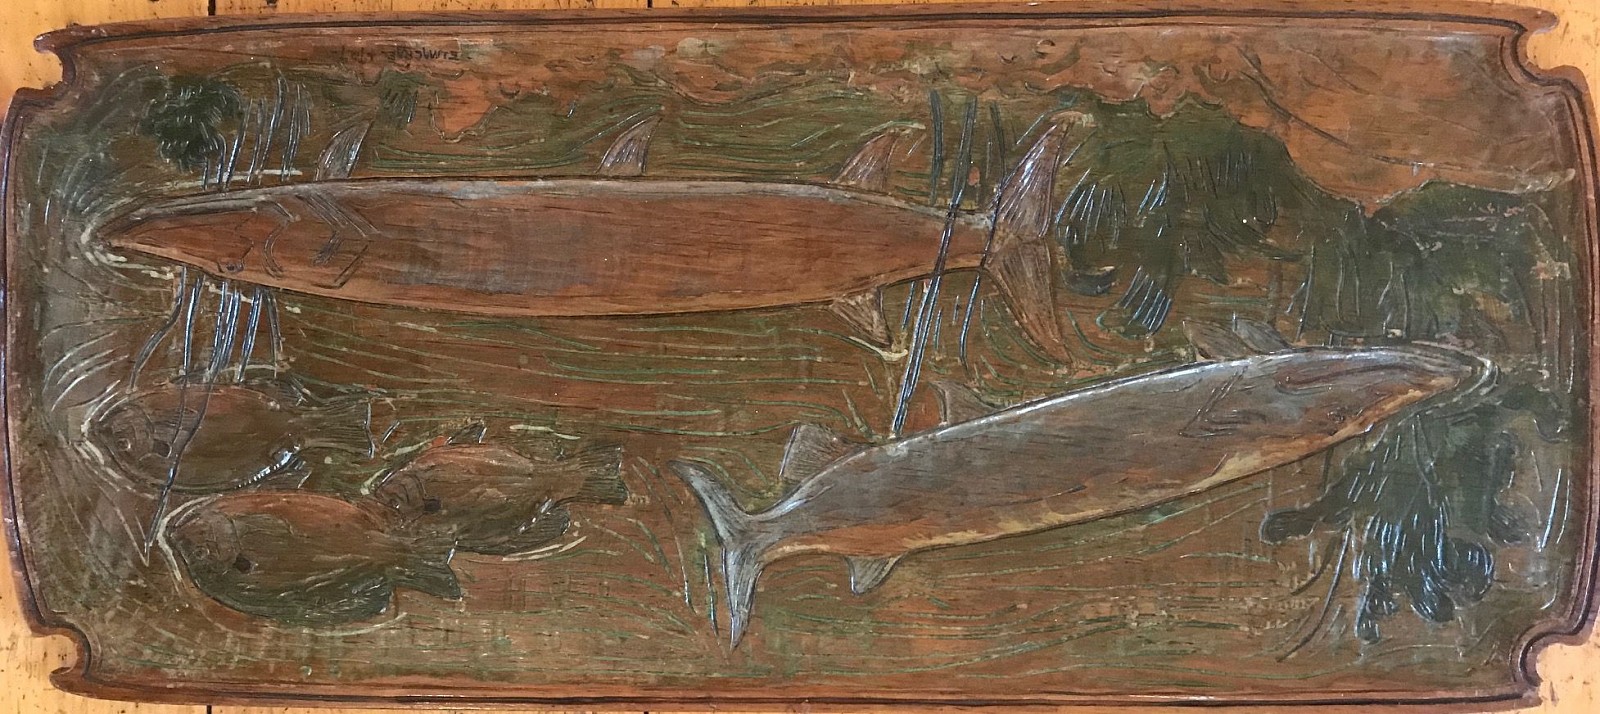 Elmer Livingston MacRae, Under the Sea, 1929
carved and painted wood, 11 1/4" x 26"
signed E. L. Macrae and dated 1929, l.r.
JCA 6321
$2,000